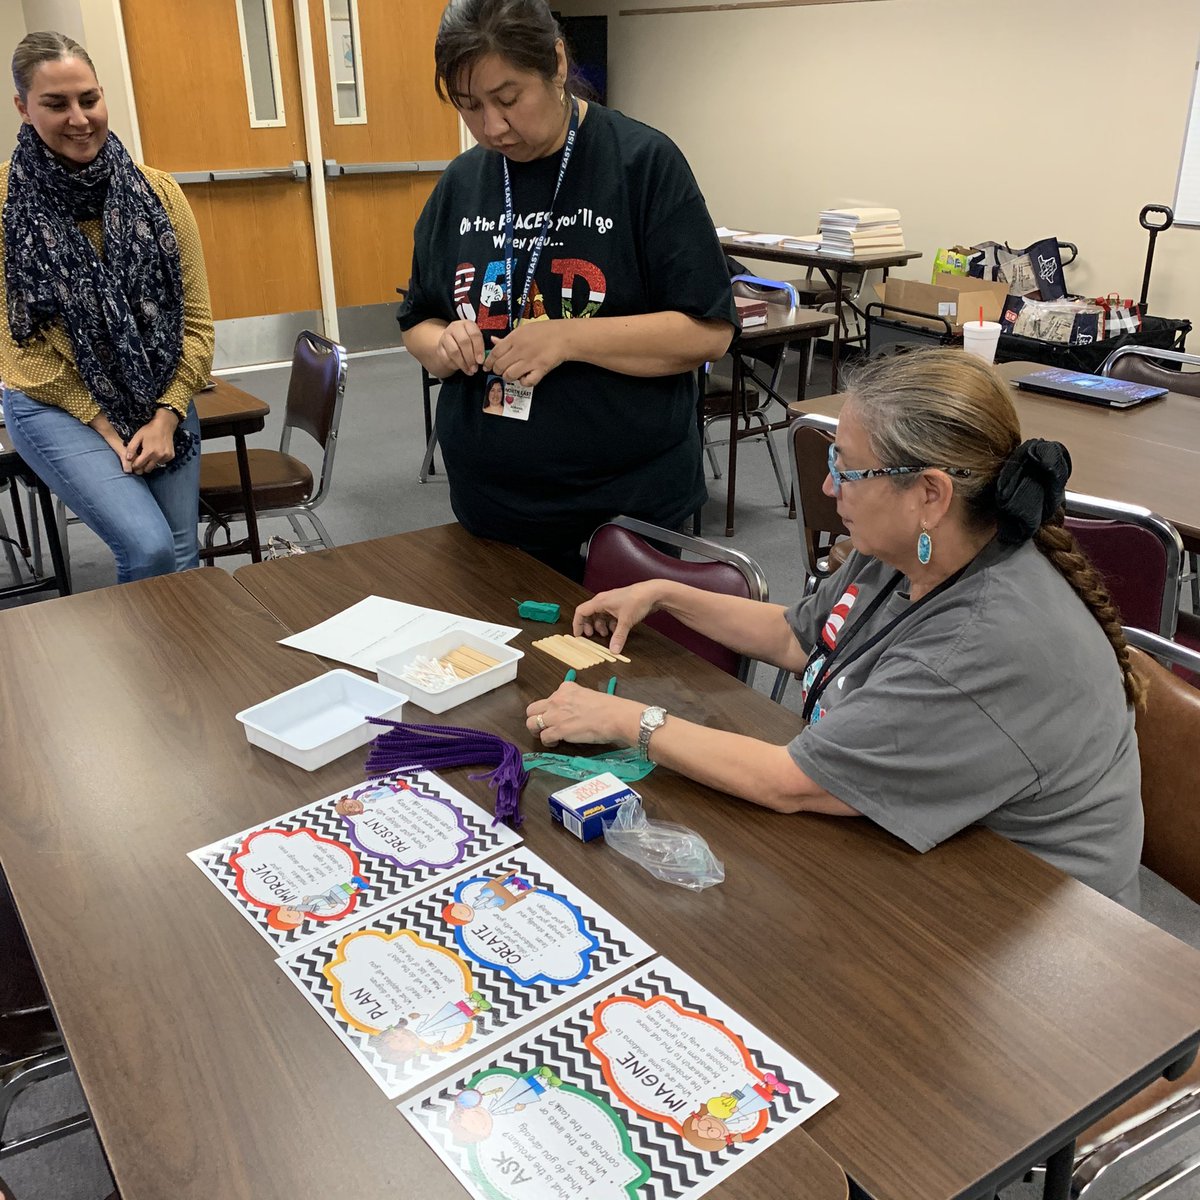 STEAM: building a strong house that the Big Bad Wolf “can’t blow down”at 2nd grade science PD. Great teamwork! #discoverNEISD #theneisdway #neisd_science